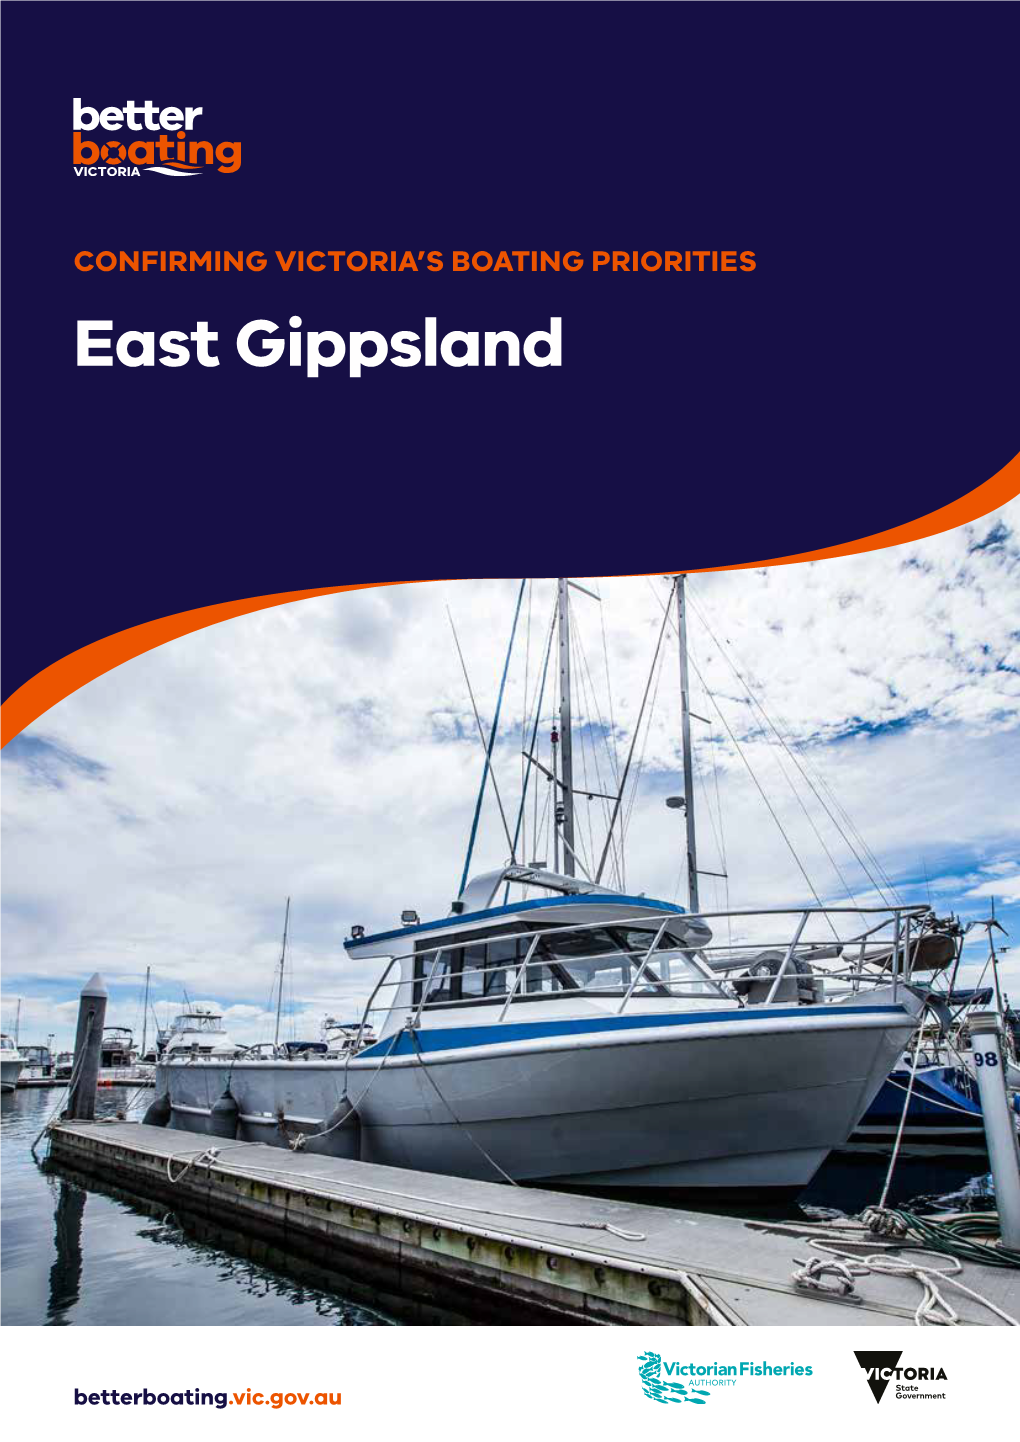 Confirming Boating Priorities in East Gippsland